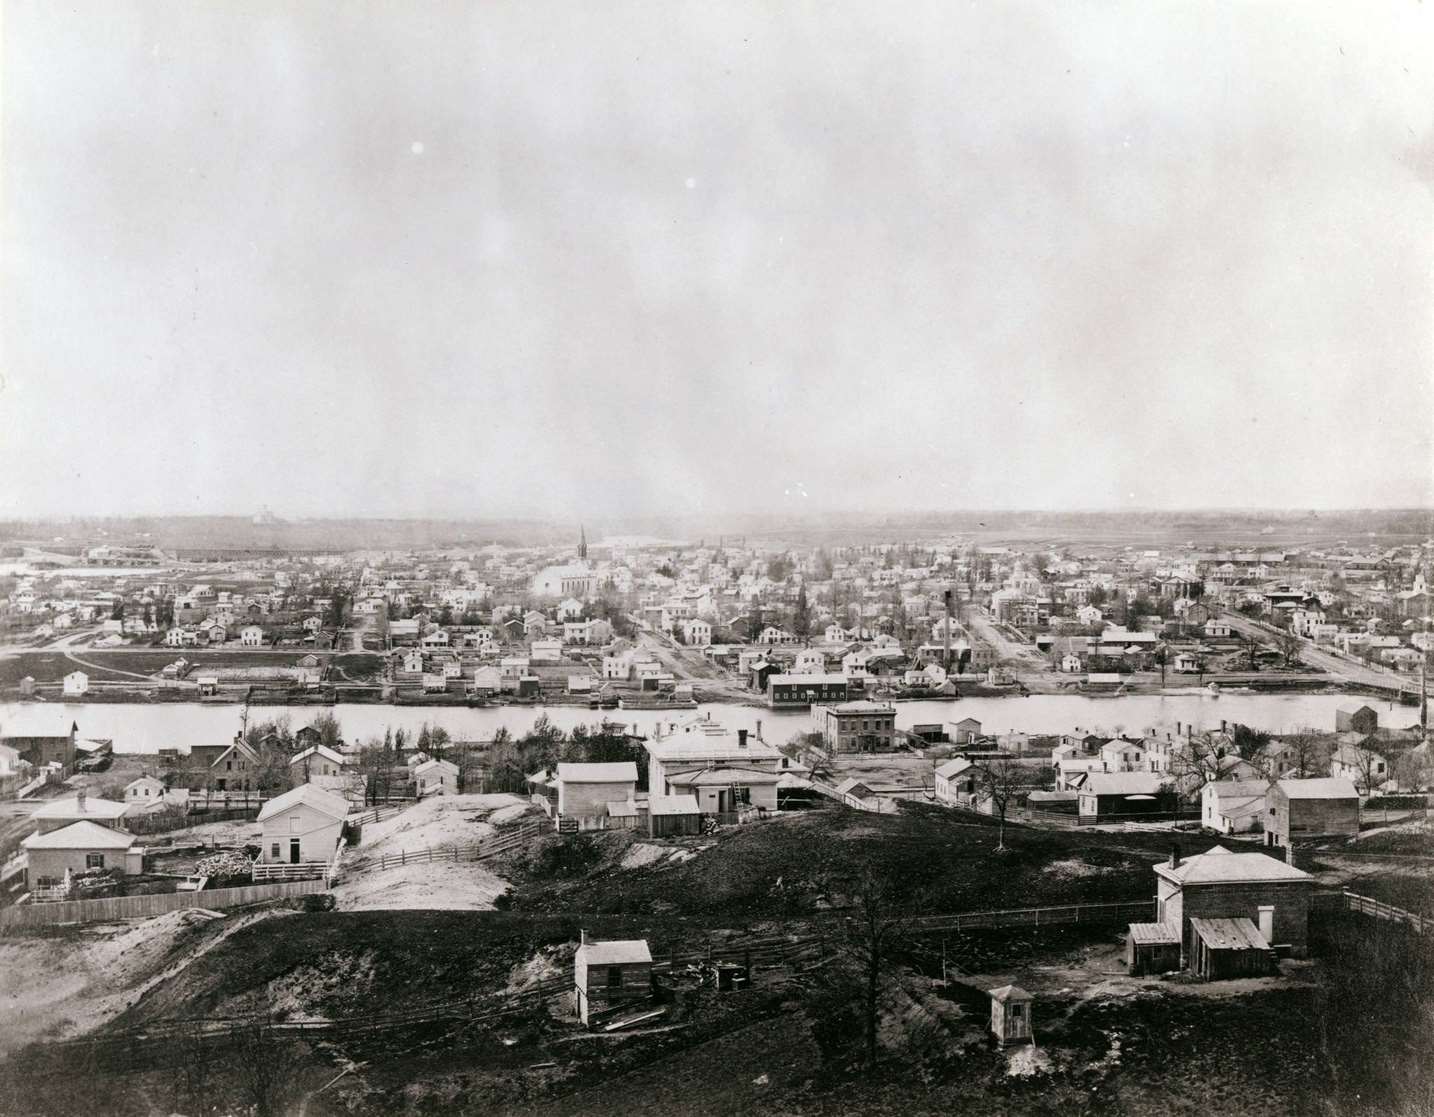 Elevated view of Janesville with a residential area in the foreground and the business district in the background, Janesville, Wisconsin, 1860.